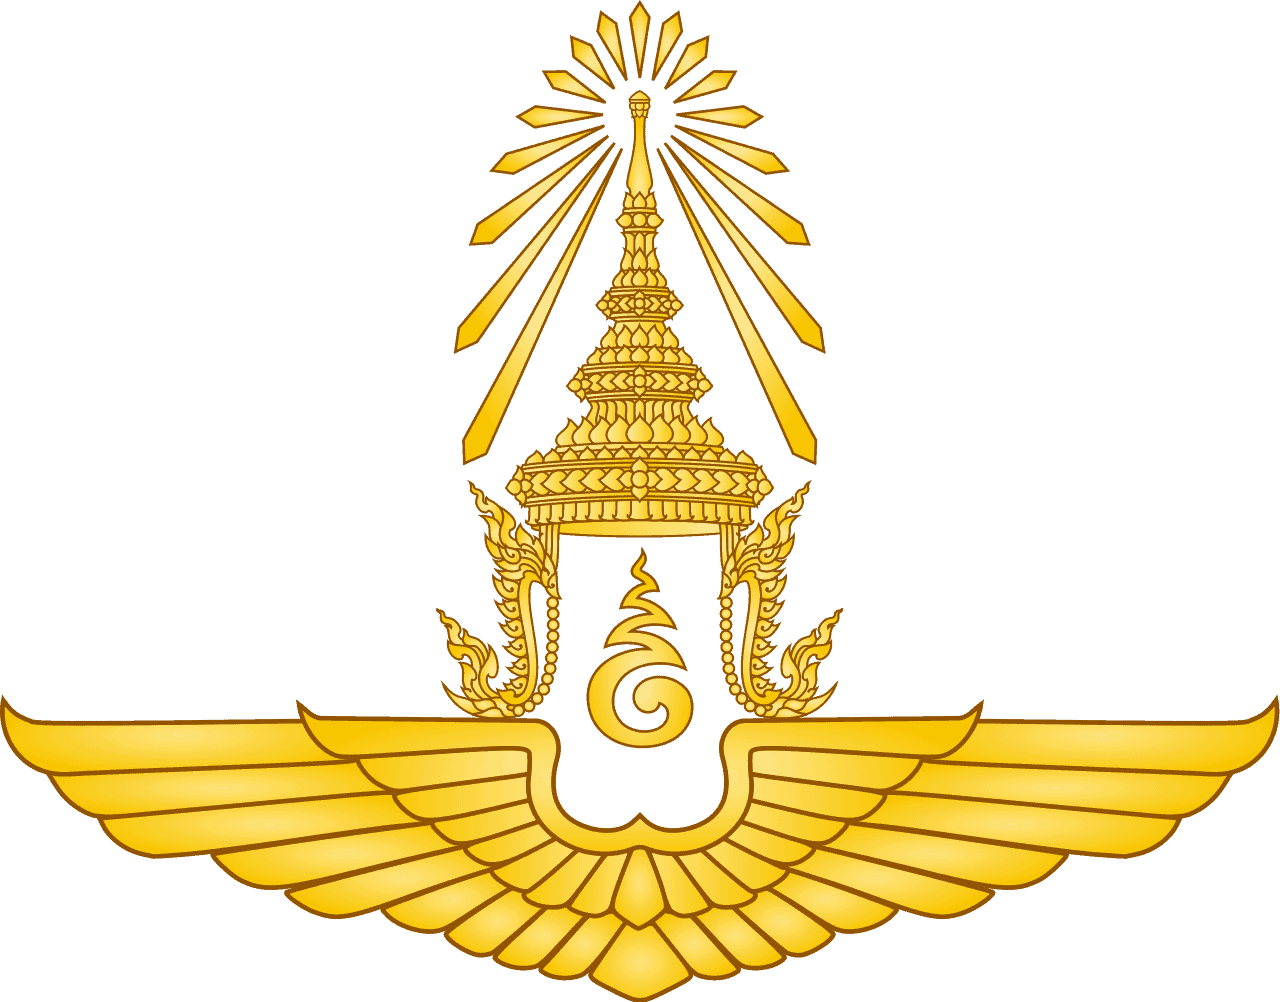 Air Force of Thailand